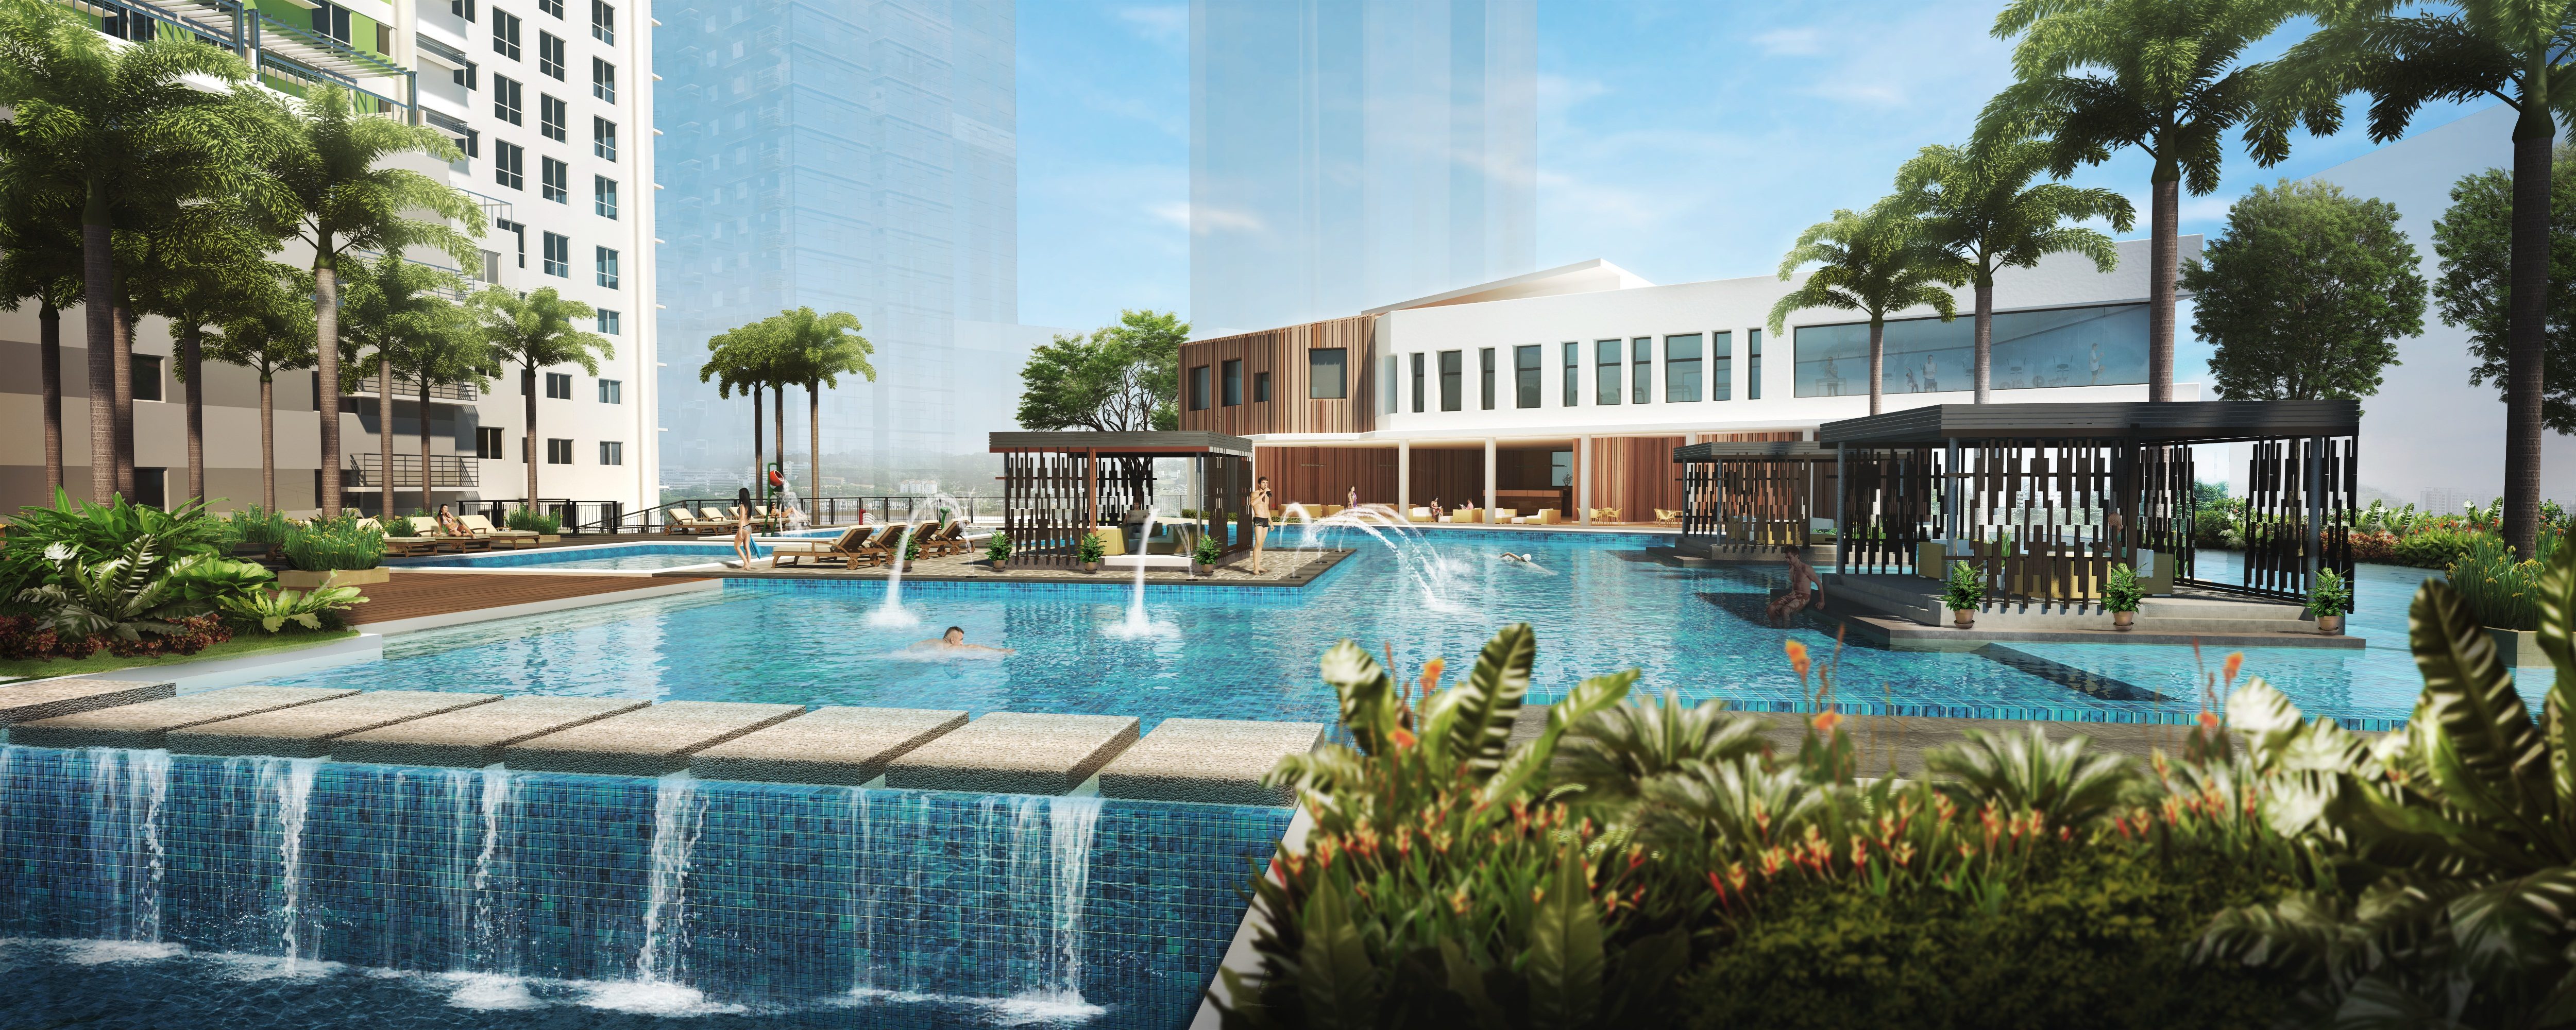 CITY RESORT. Solinea is built around the concept of a city resort lifestyle: a highly strategic residential location with a careful selection of resort-inspired amenities. Image from Alveo Land  